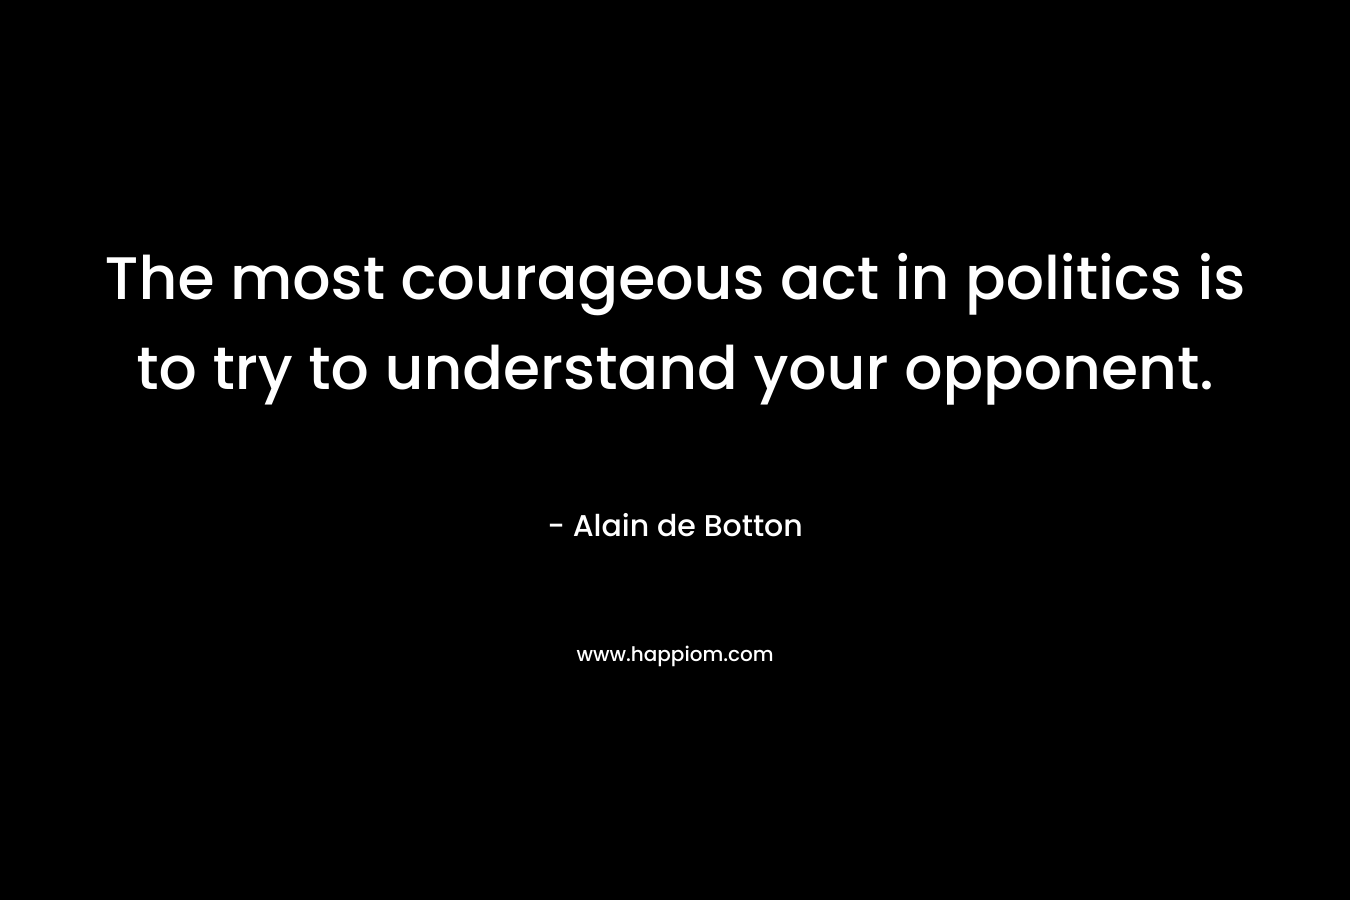 The most courageous act in politics is to try to understand your opponent.